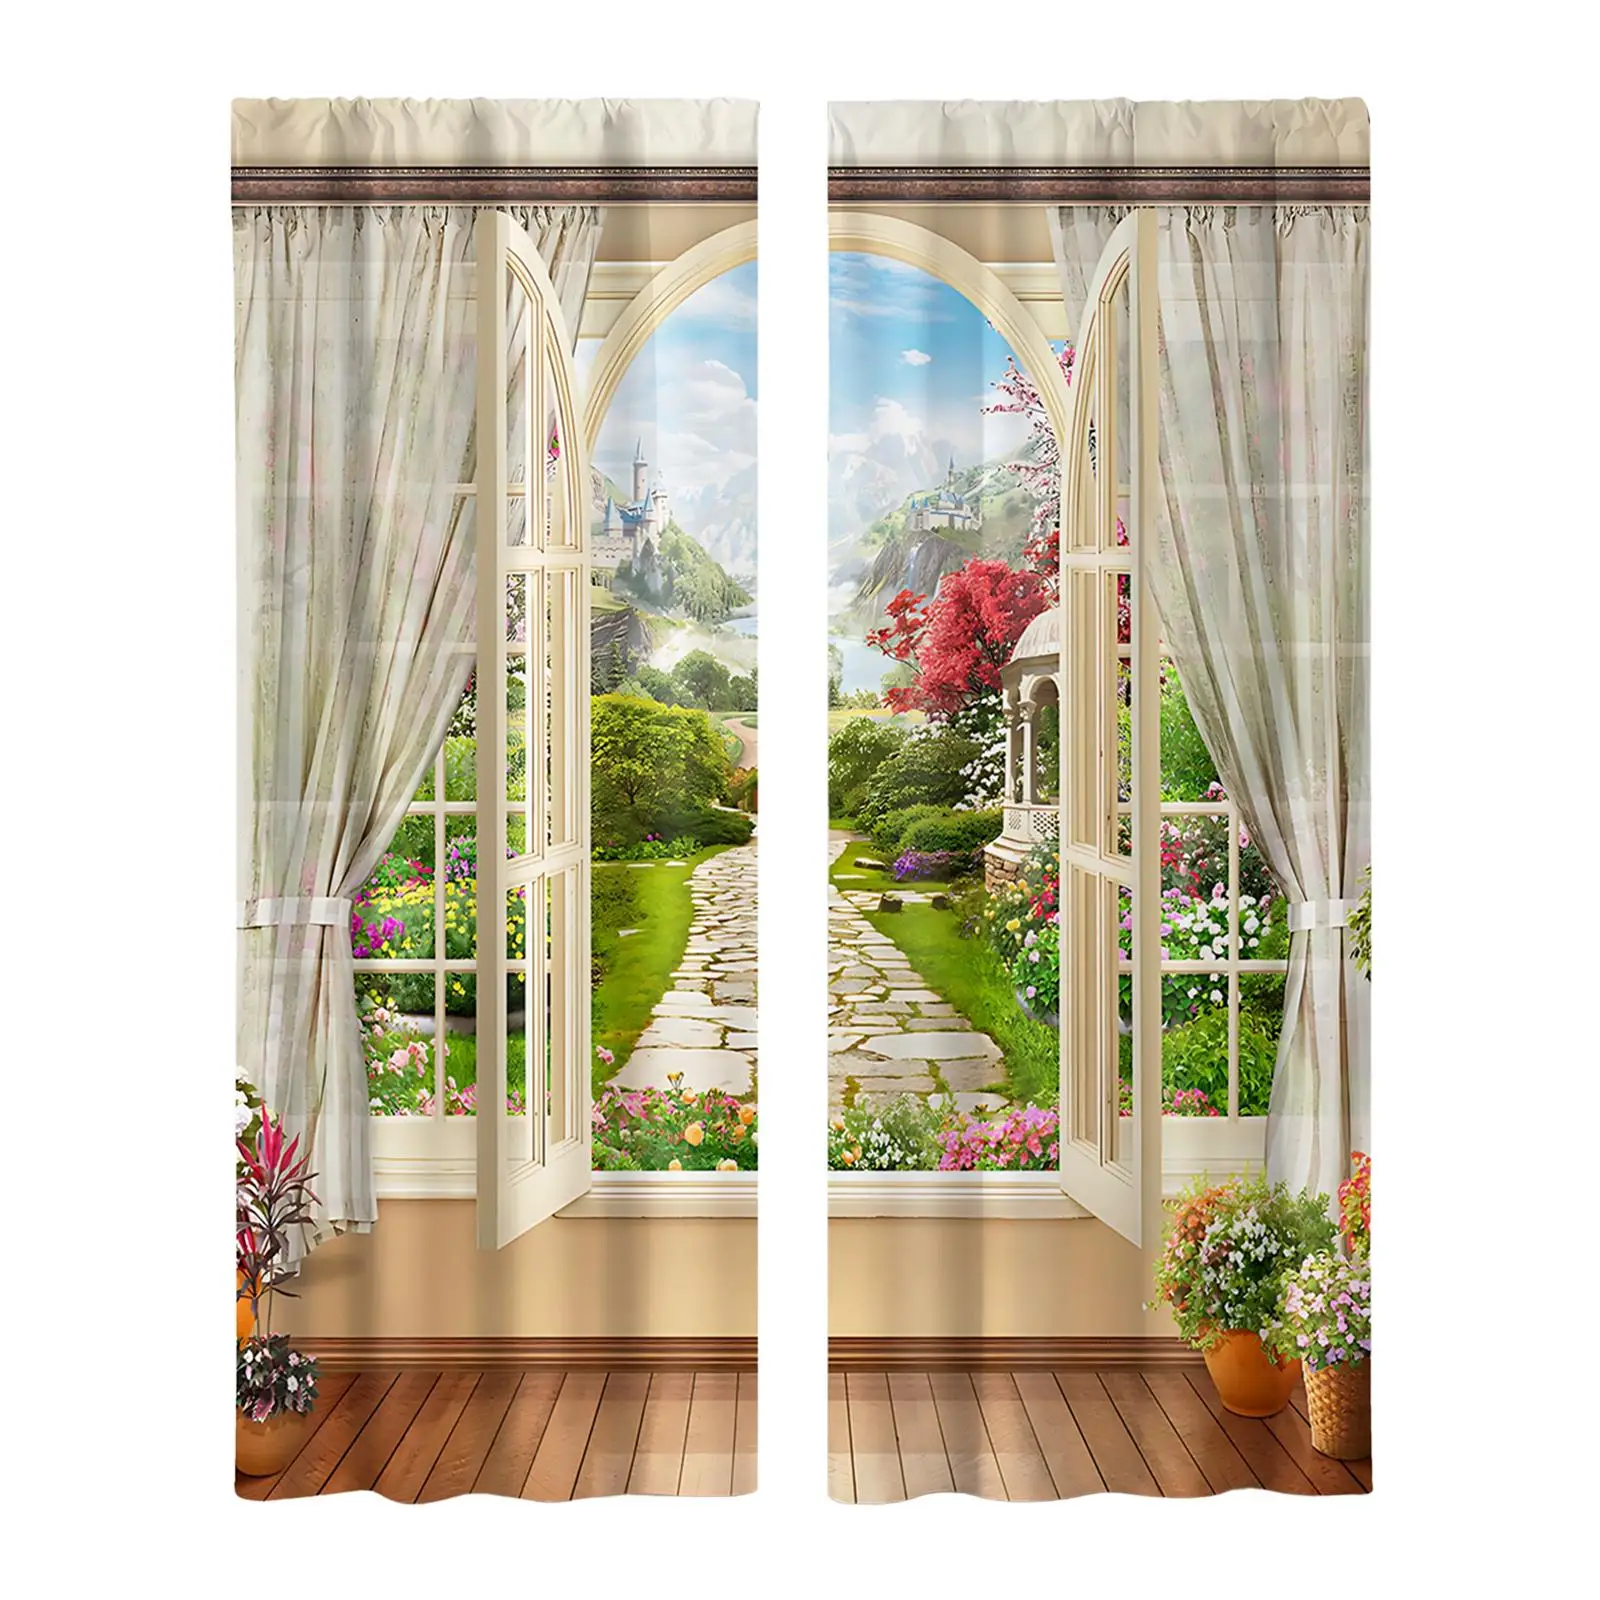 Rustic Window Curtains Decoration Garden Scenery Farmhouse Bedroom Drapes Curtain for Bedroom Living Room Kitchen Bathroom